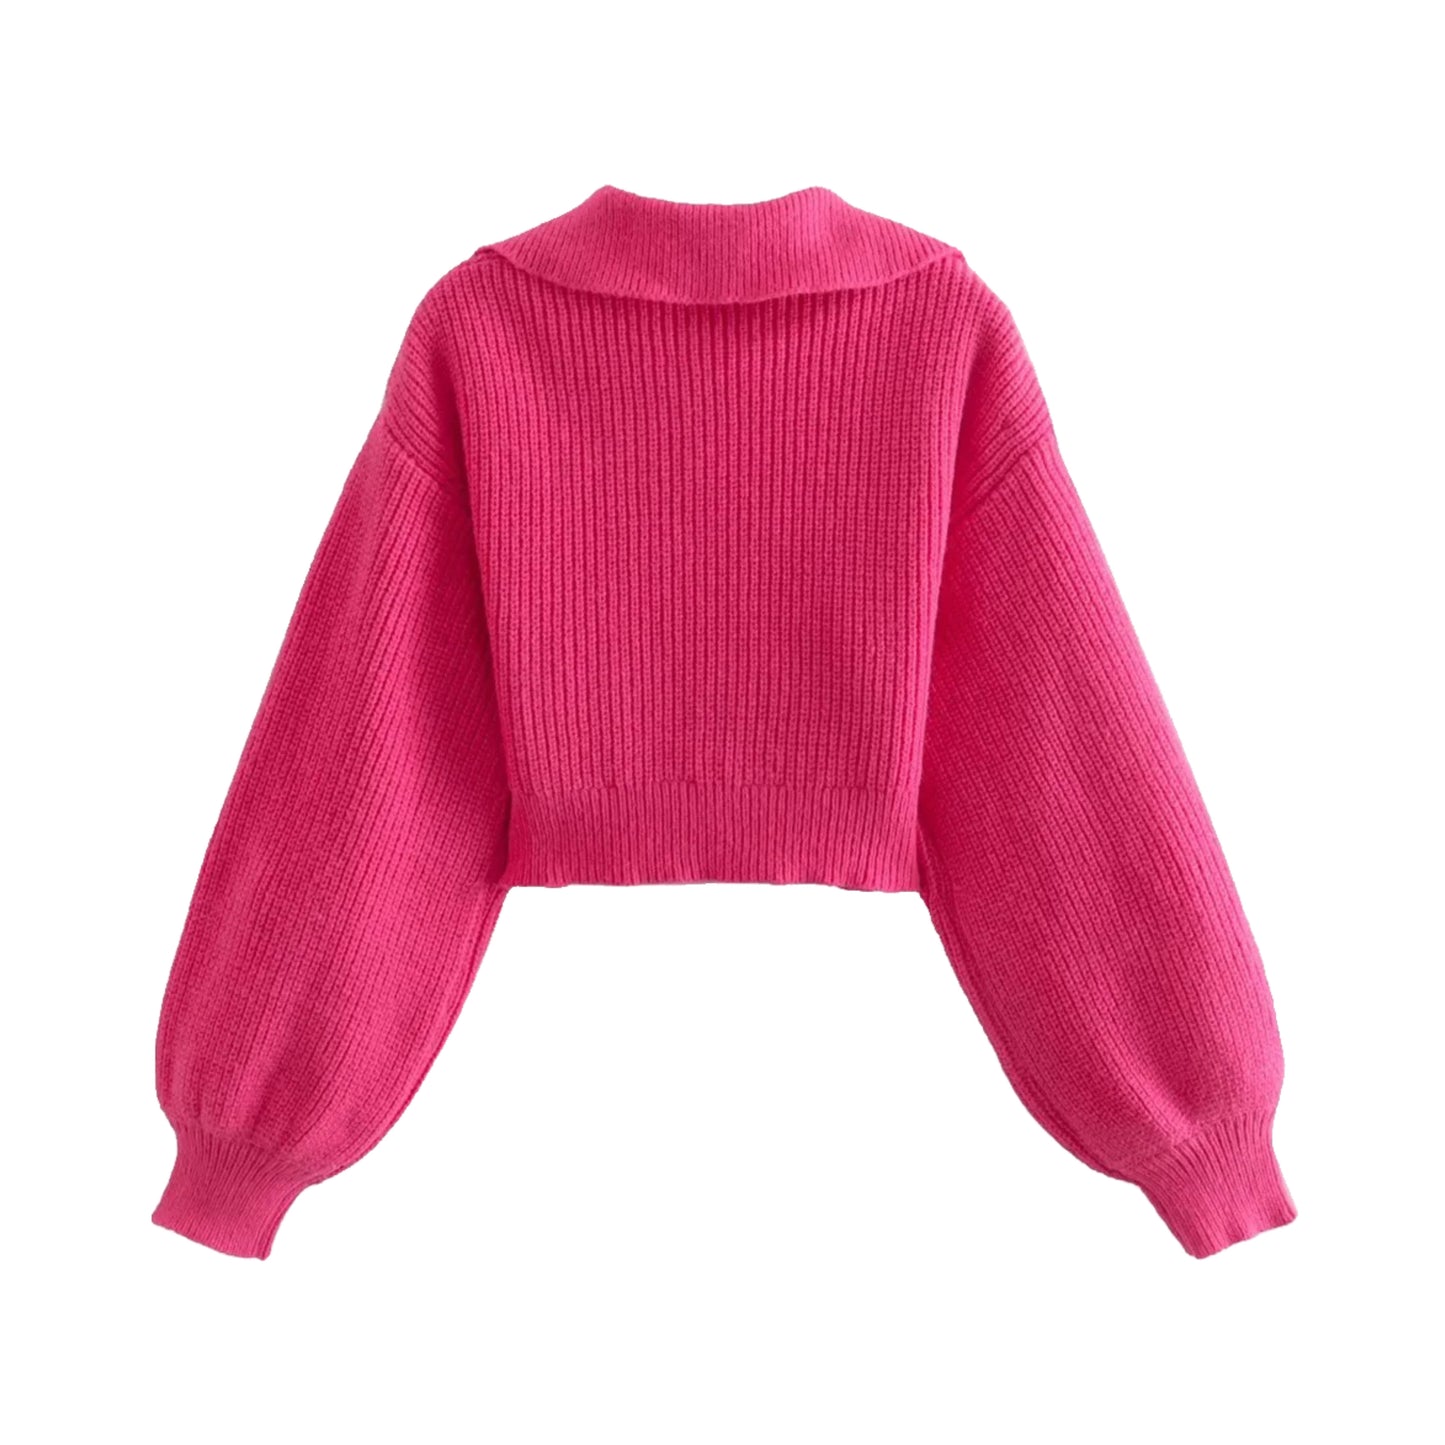 Dark Pink Oversized Knit Cropped Pullover Sweater